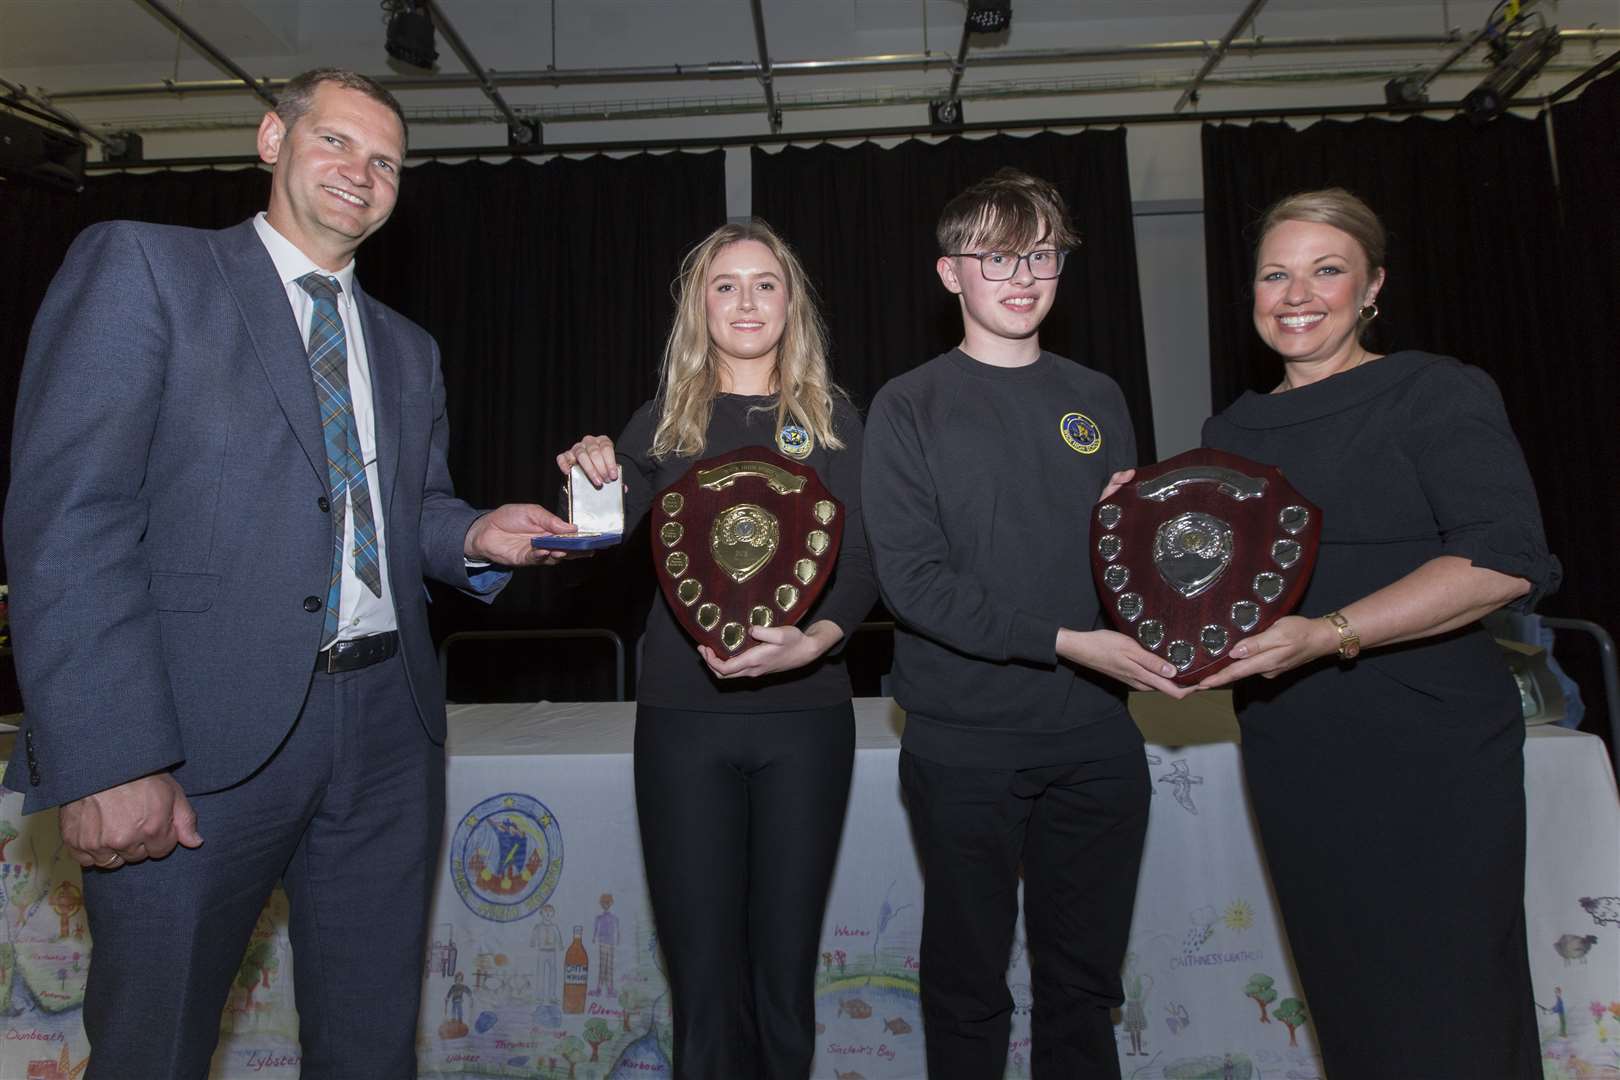 Rachel Swanson, Wick High School Dux for the past academic year, receives her medal from head teacher Sebastion Sandecki, while guest speaker Gail Ross presents the runner-up award to Ewan Begg. Picture: Robert MacDonald/Northern Studios